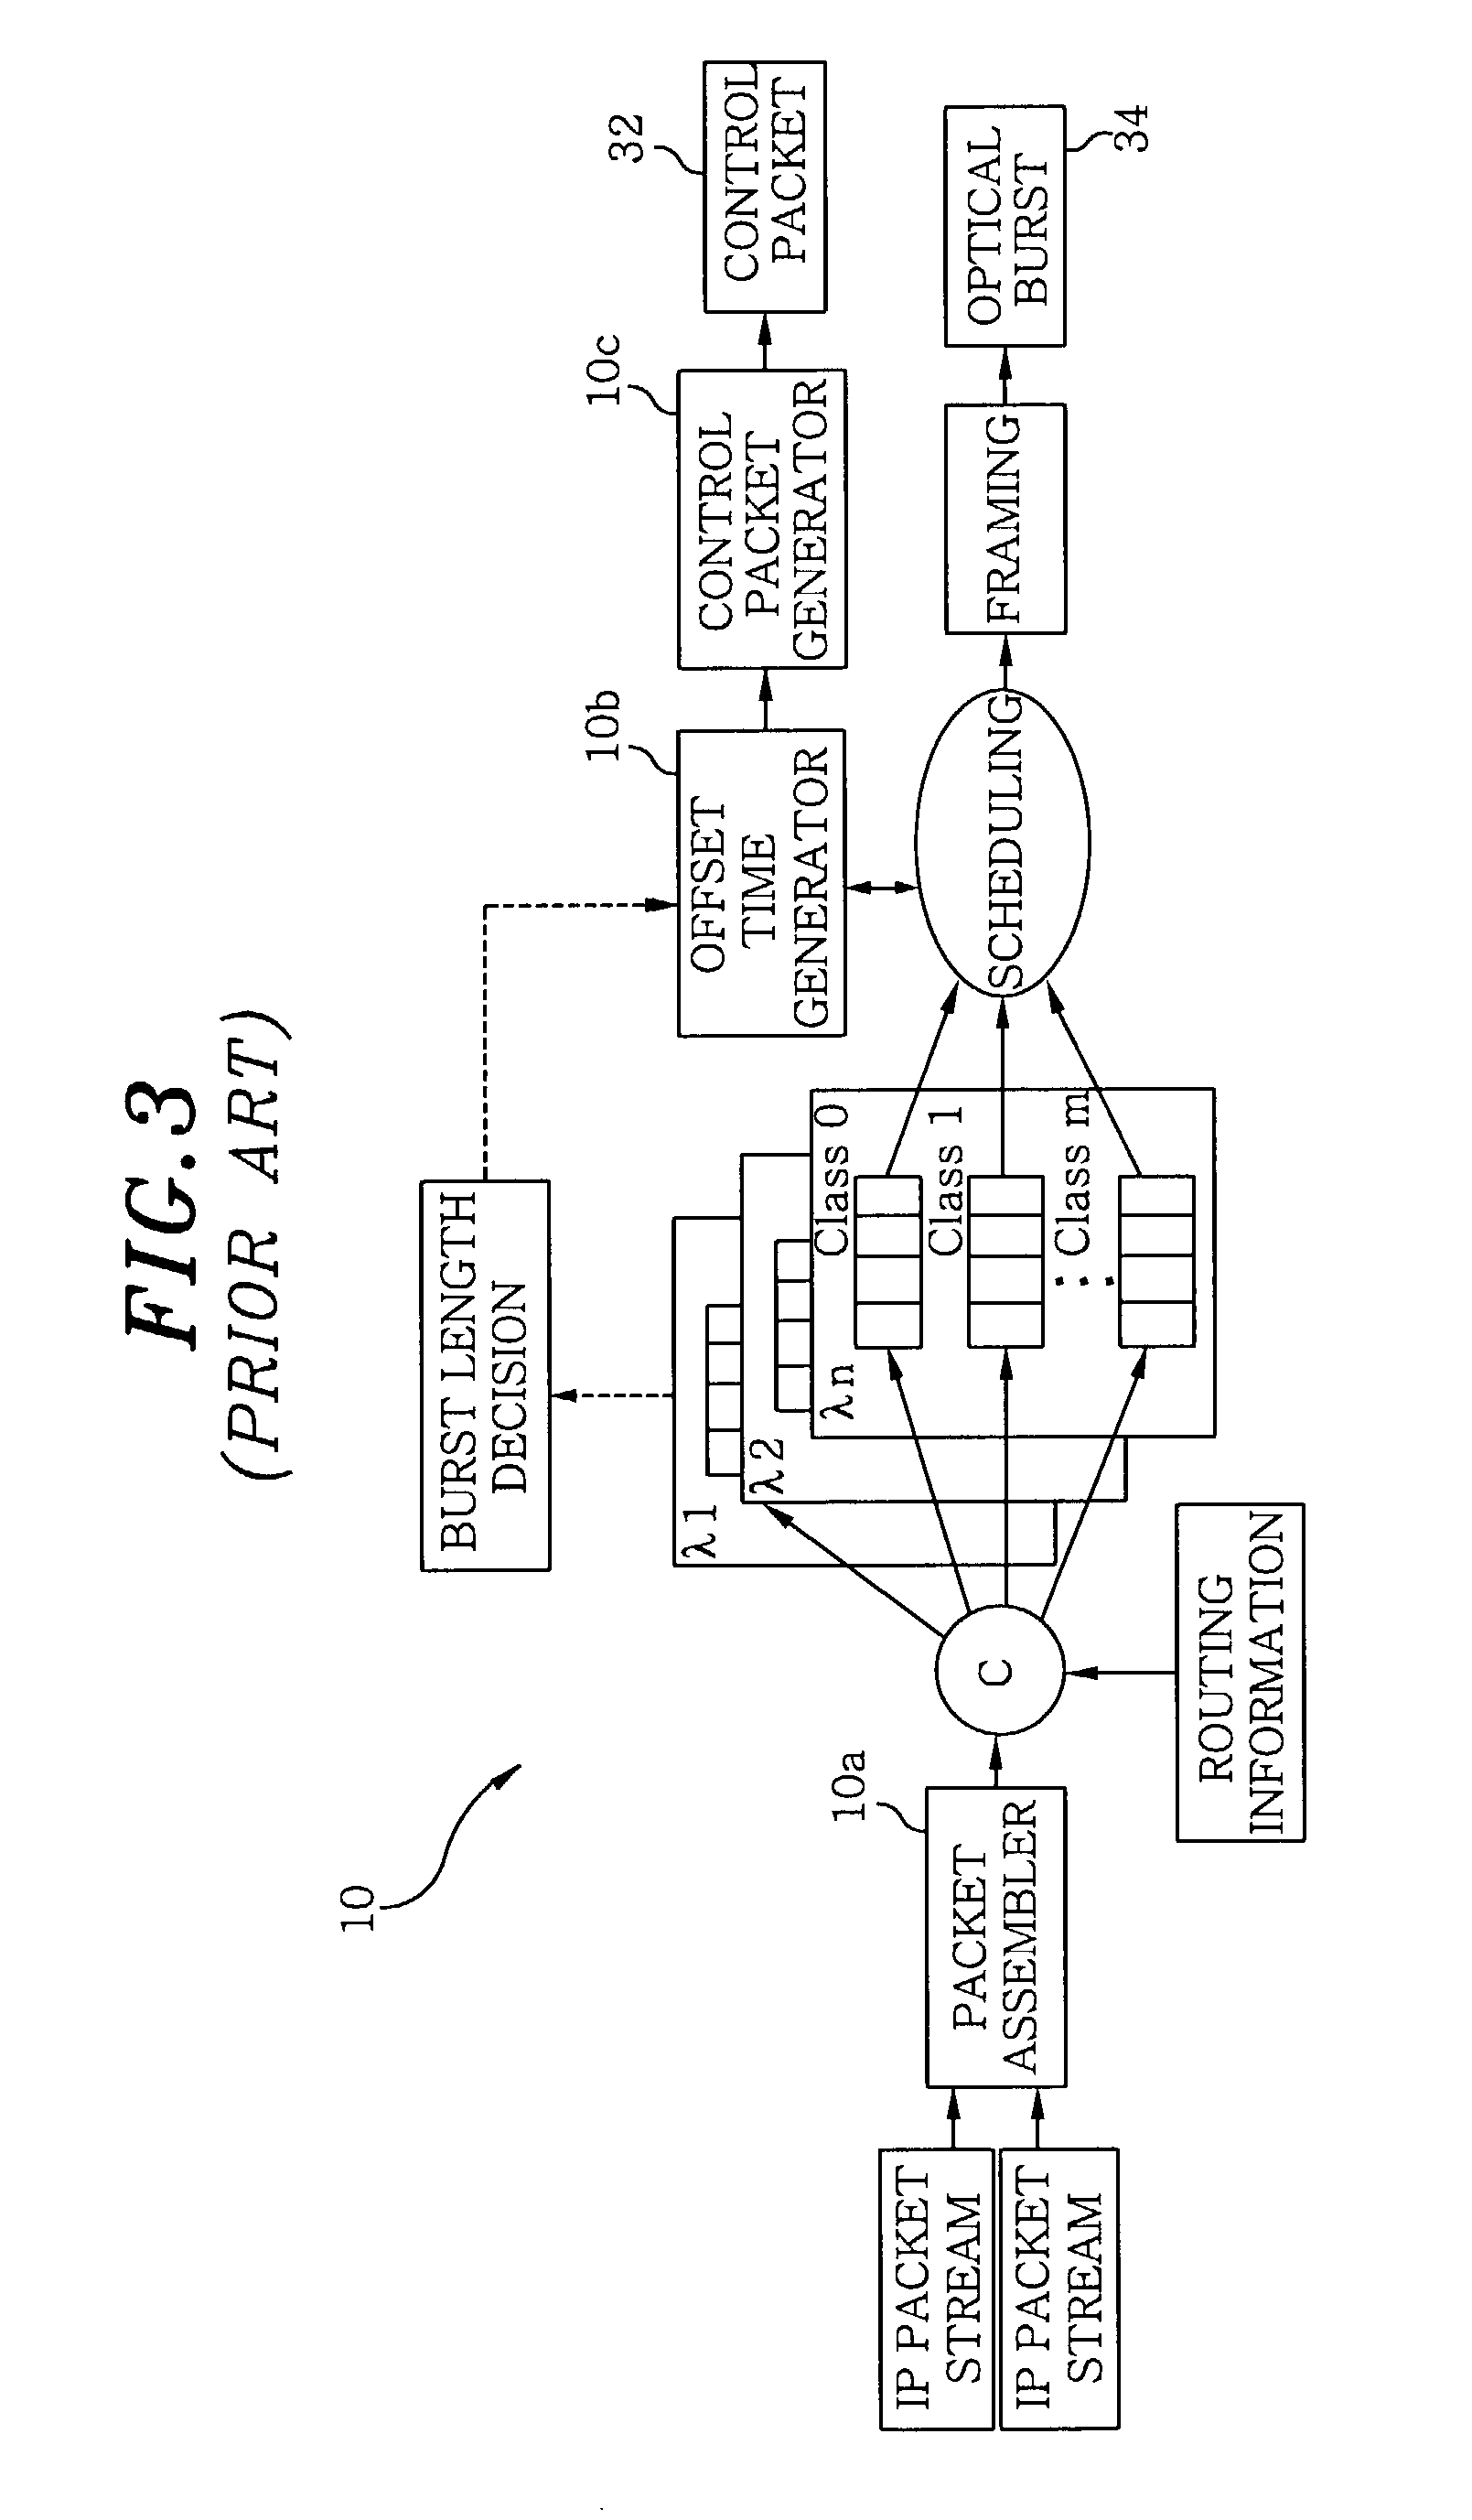 Control packet structure and method for generating a data burst in optical burst switching networks